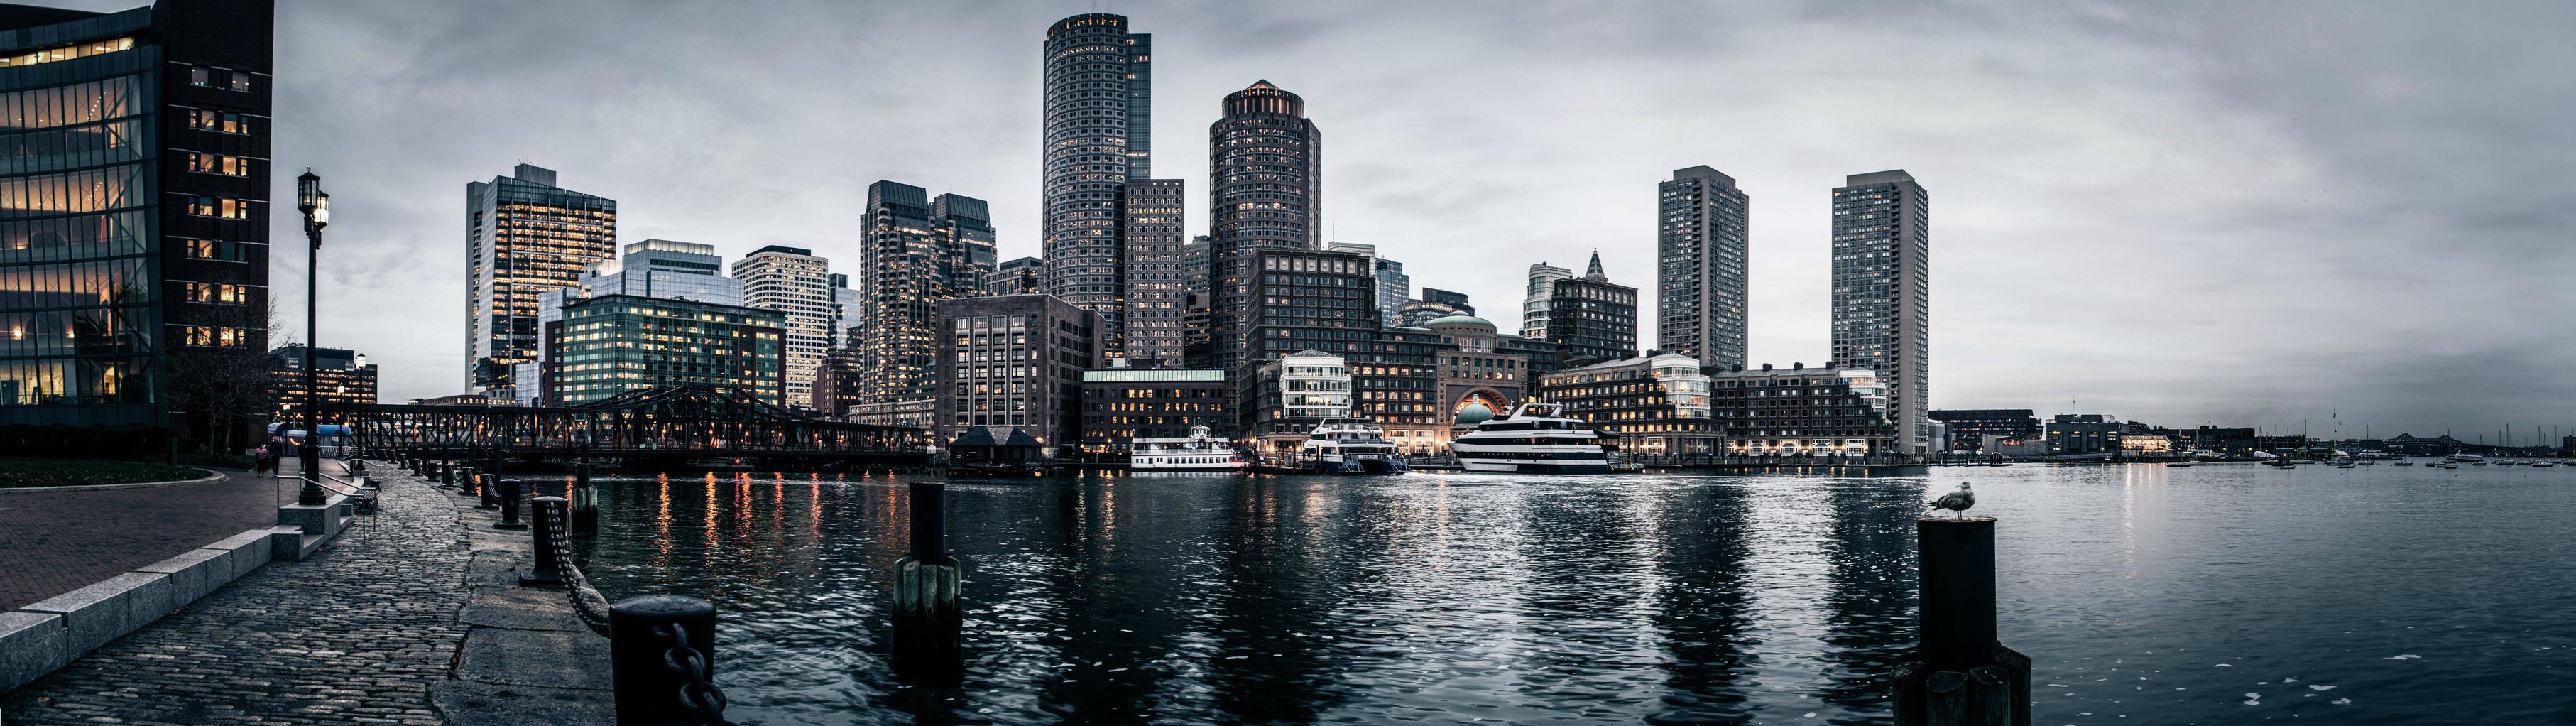 Gorgeous HD Panorama Of Harbor Skyline Xpost From R Wallpaper